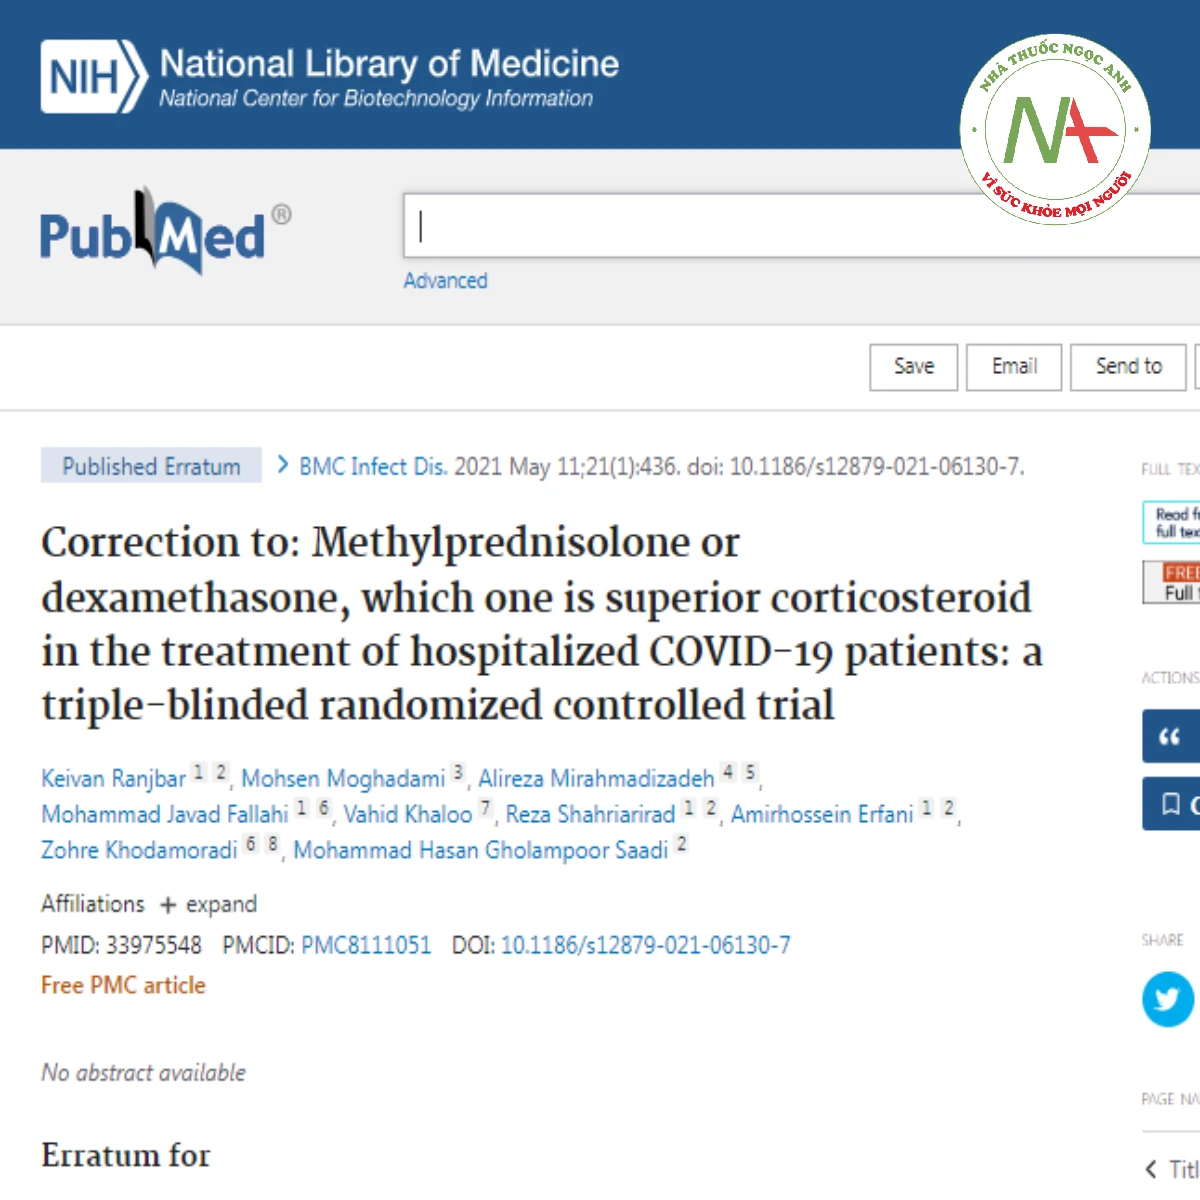 Correction to: Methylprednisolone or dexamethasone, which one is superior corticosteroid in the treatment of hospitalized COVID-19 patients: a triple-blinded randomized controlled trial